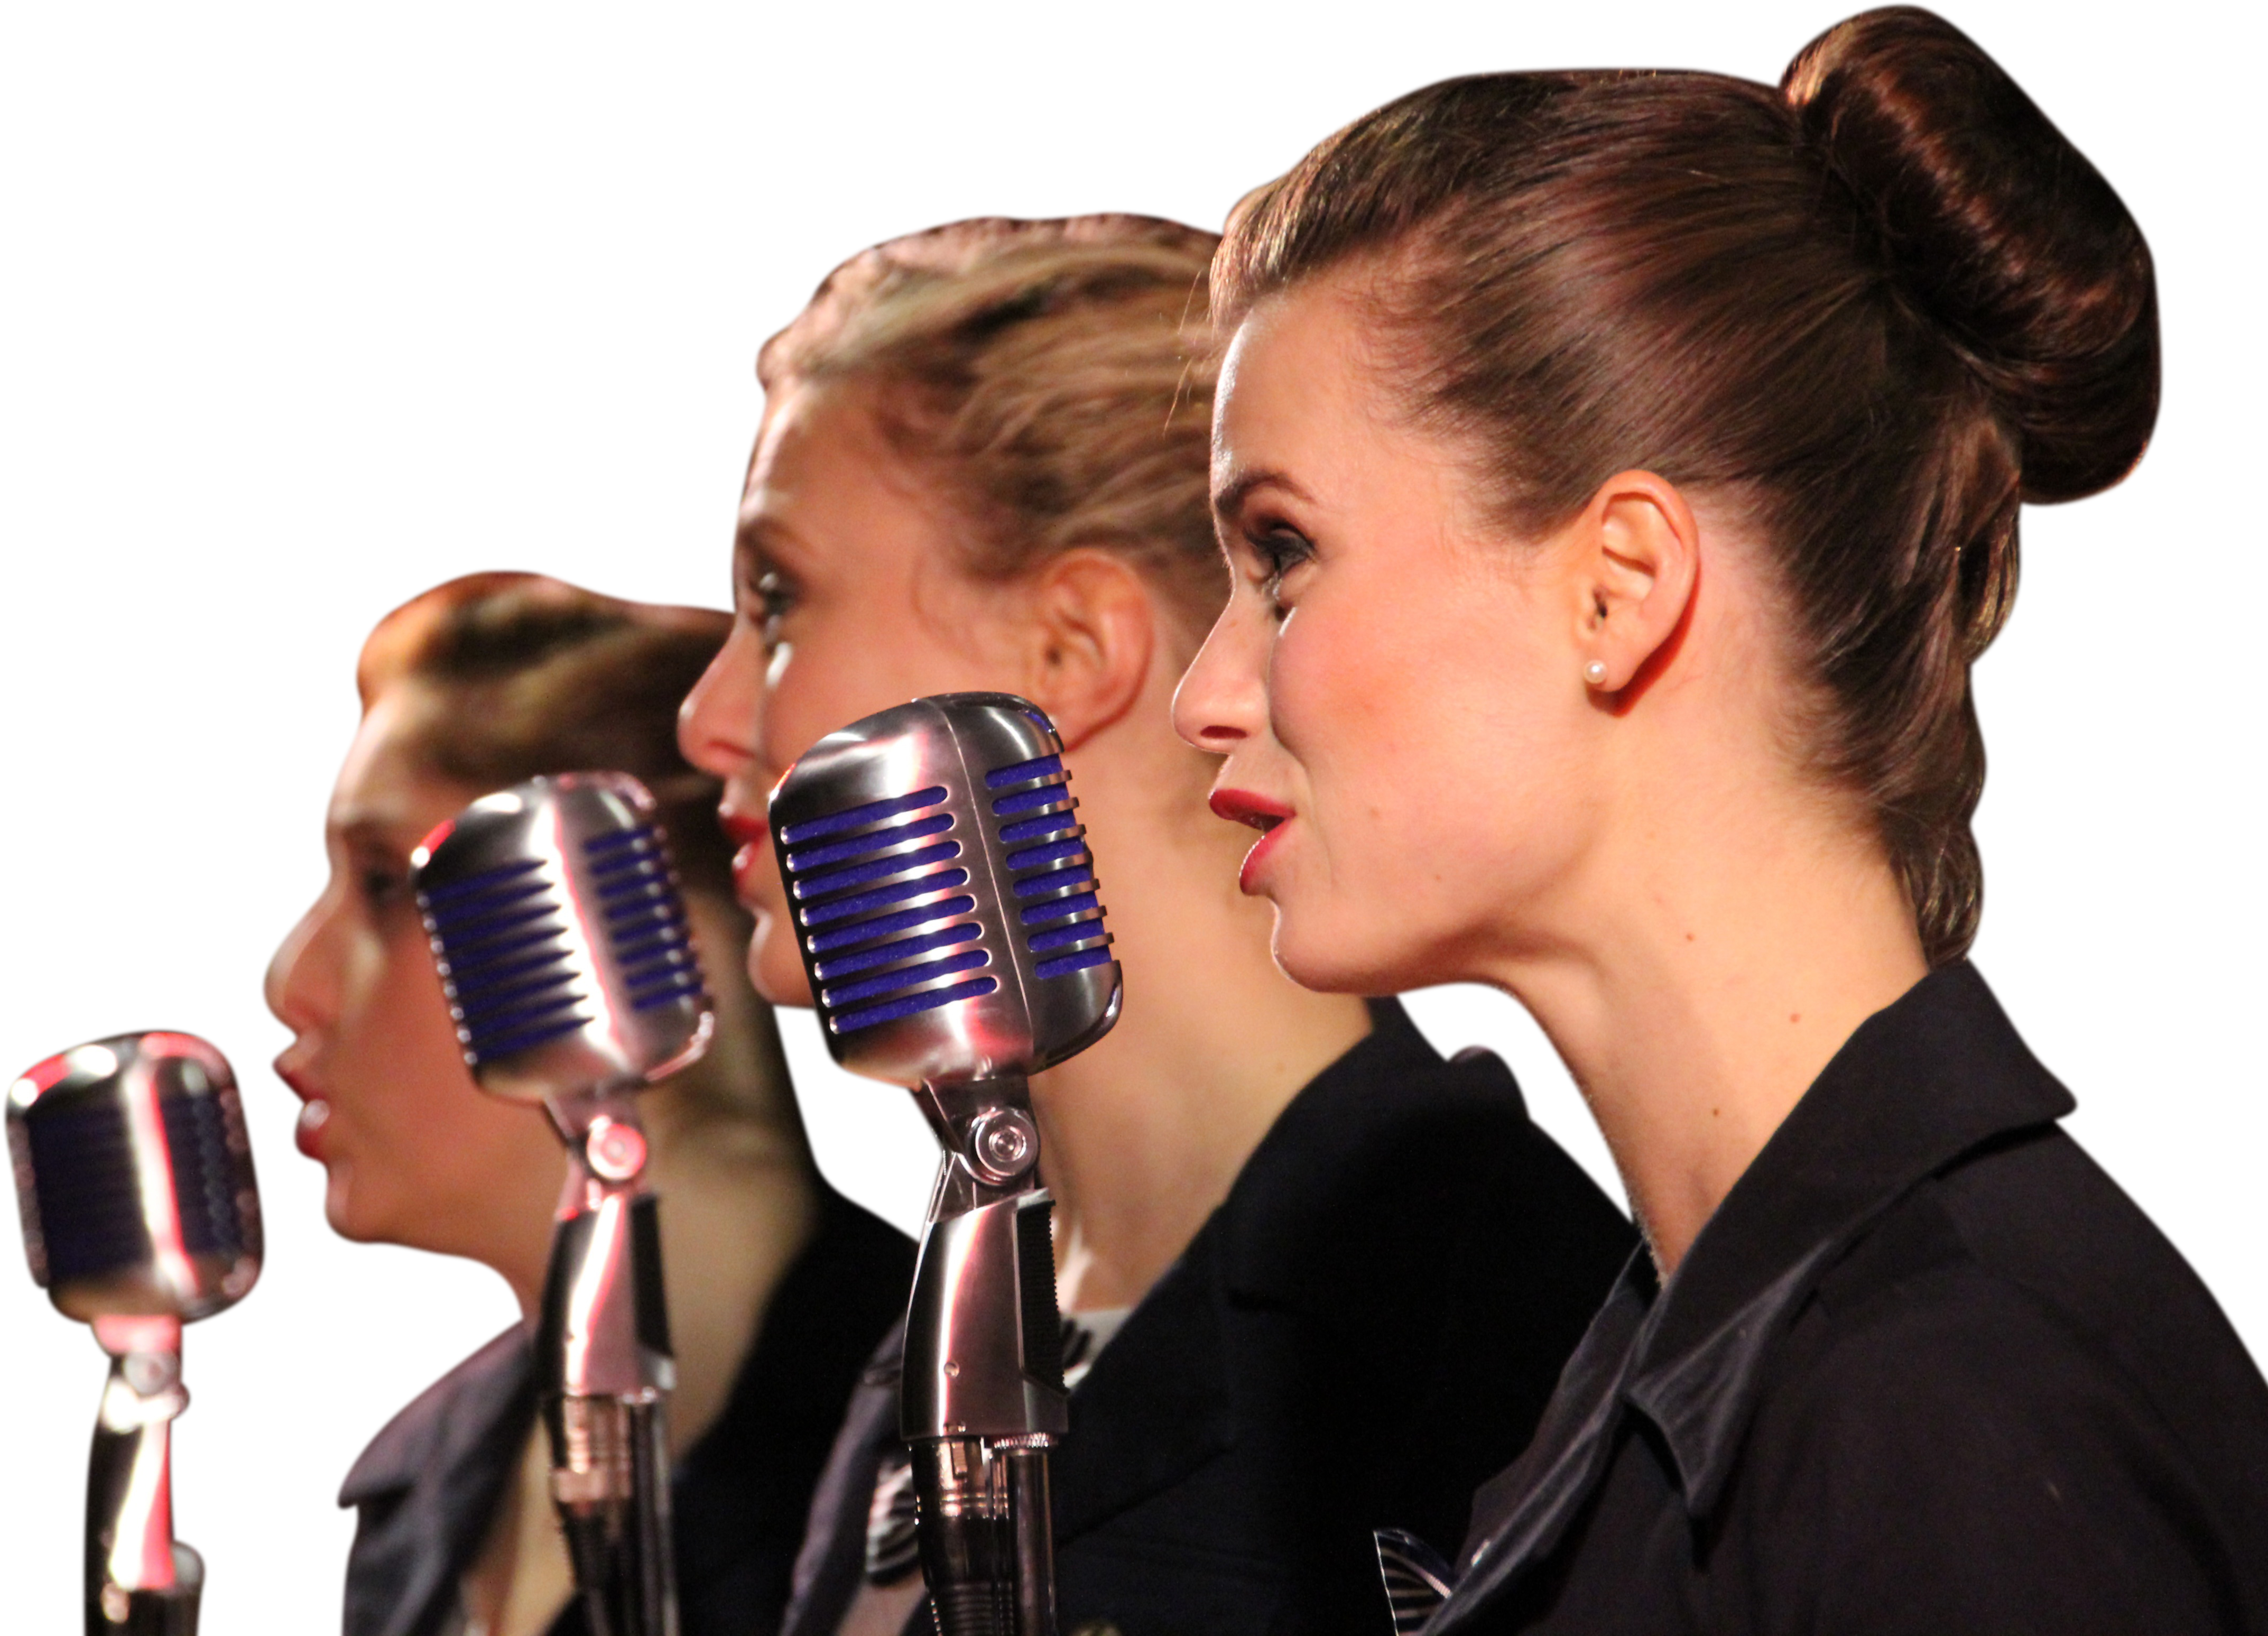 A Group Of Women Singing Into Microphones